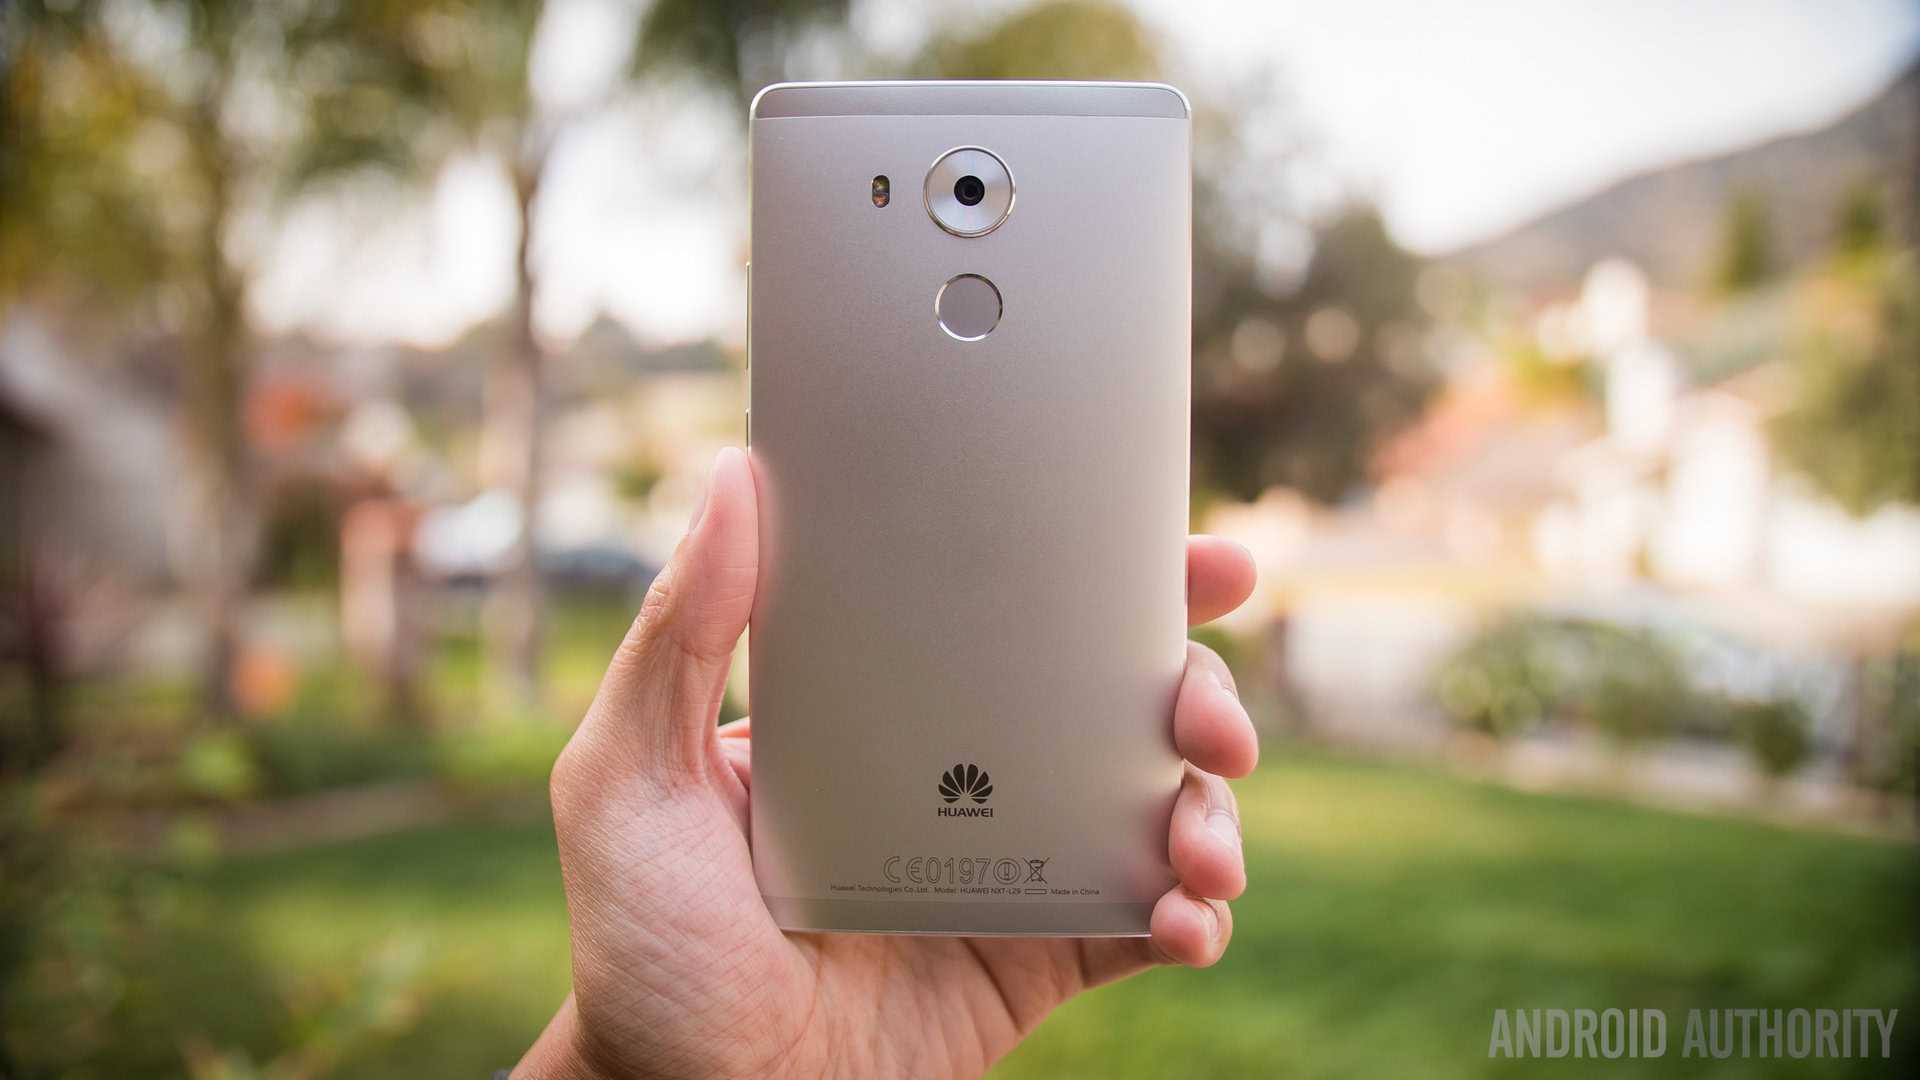 Opnieuw schieten Oordeel Schurk Upgrading from HUAWEI Mate 7 to Mate 8: what a difference a year makes